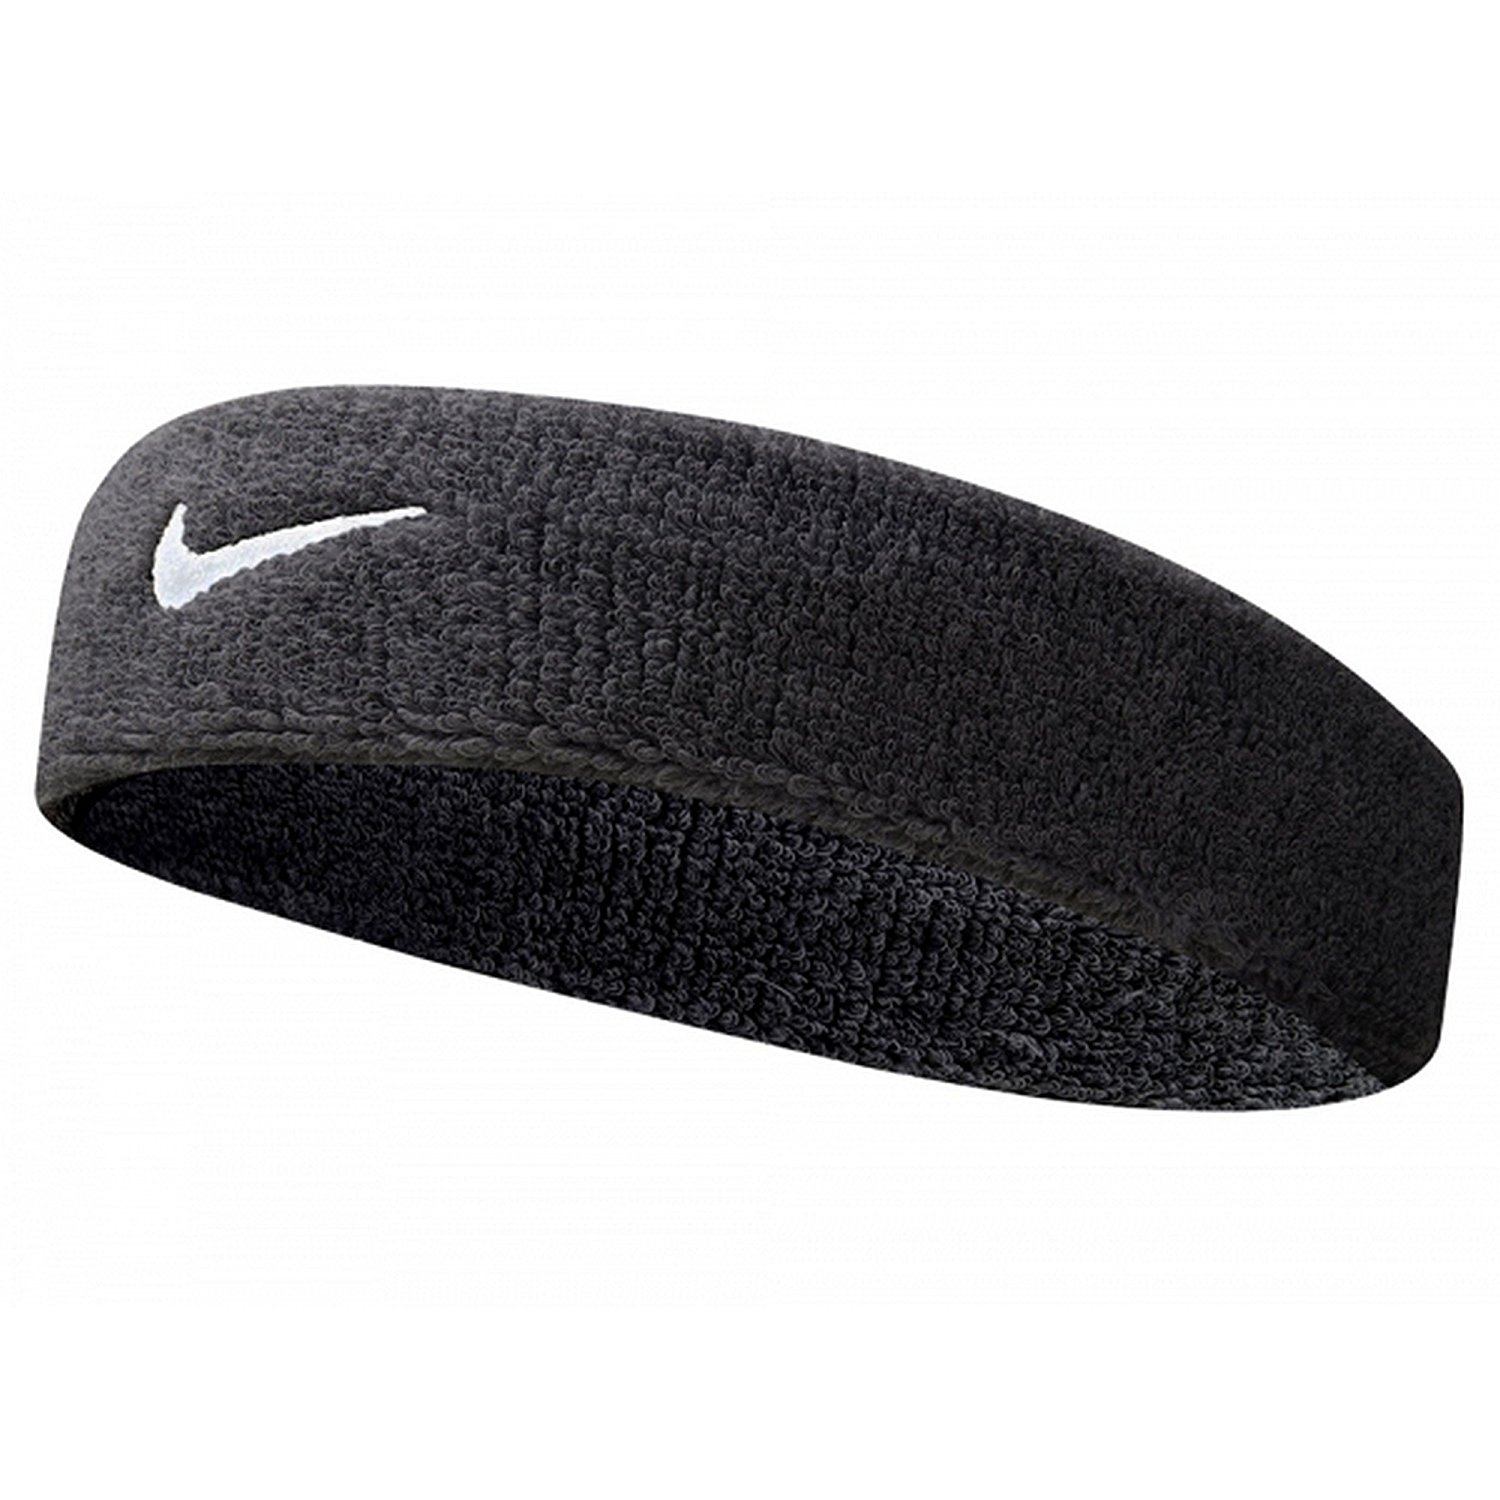 cool headbands for sports